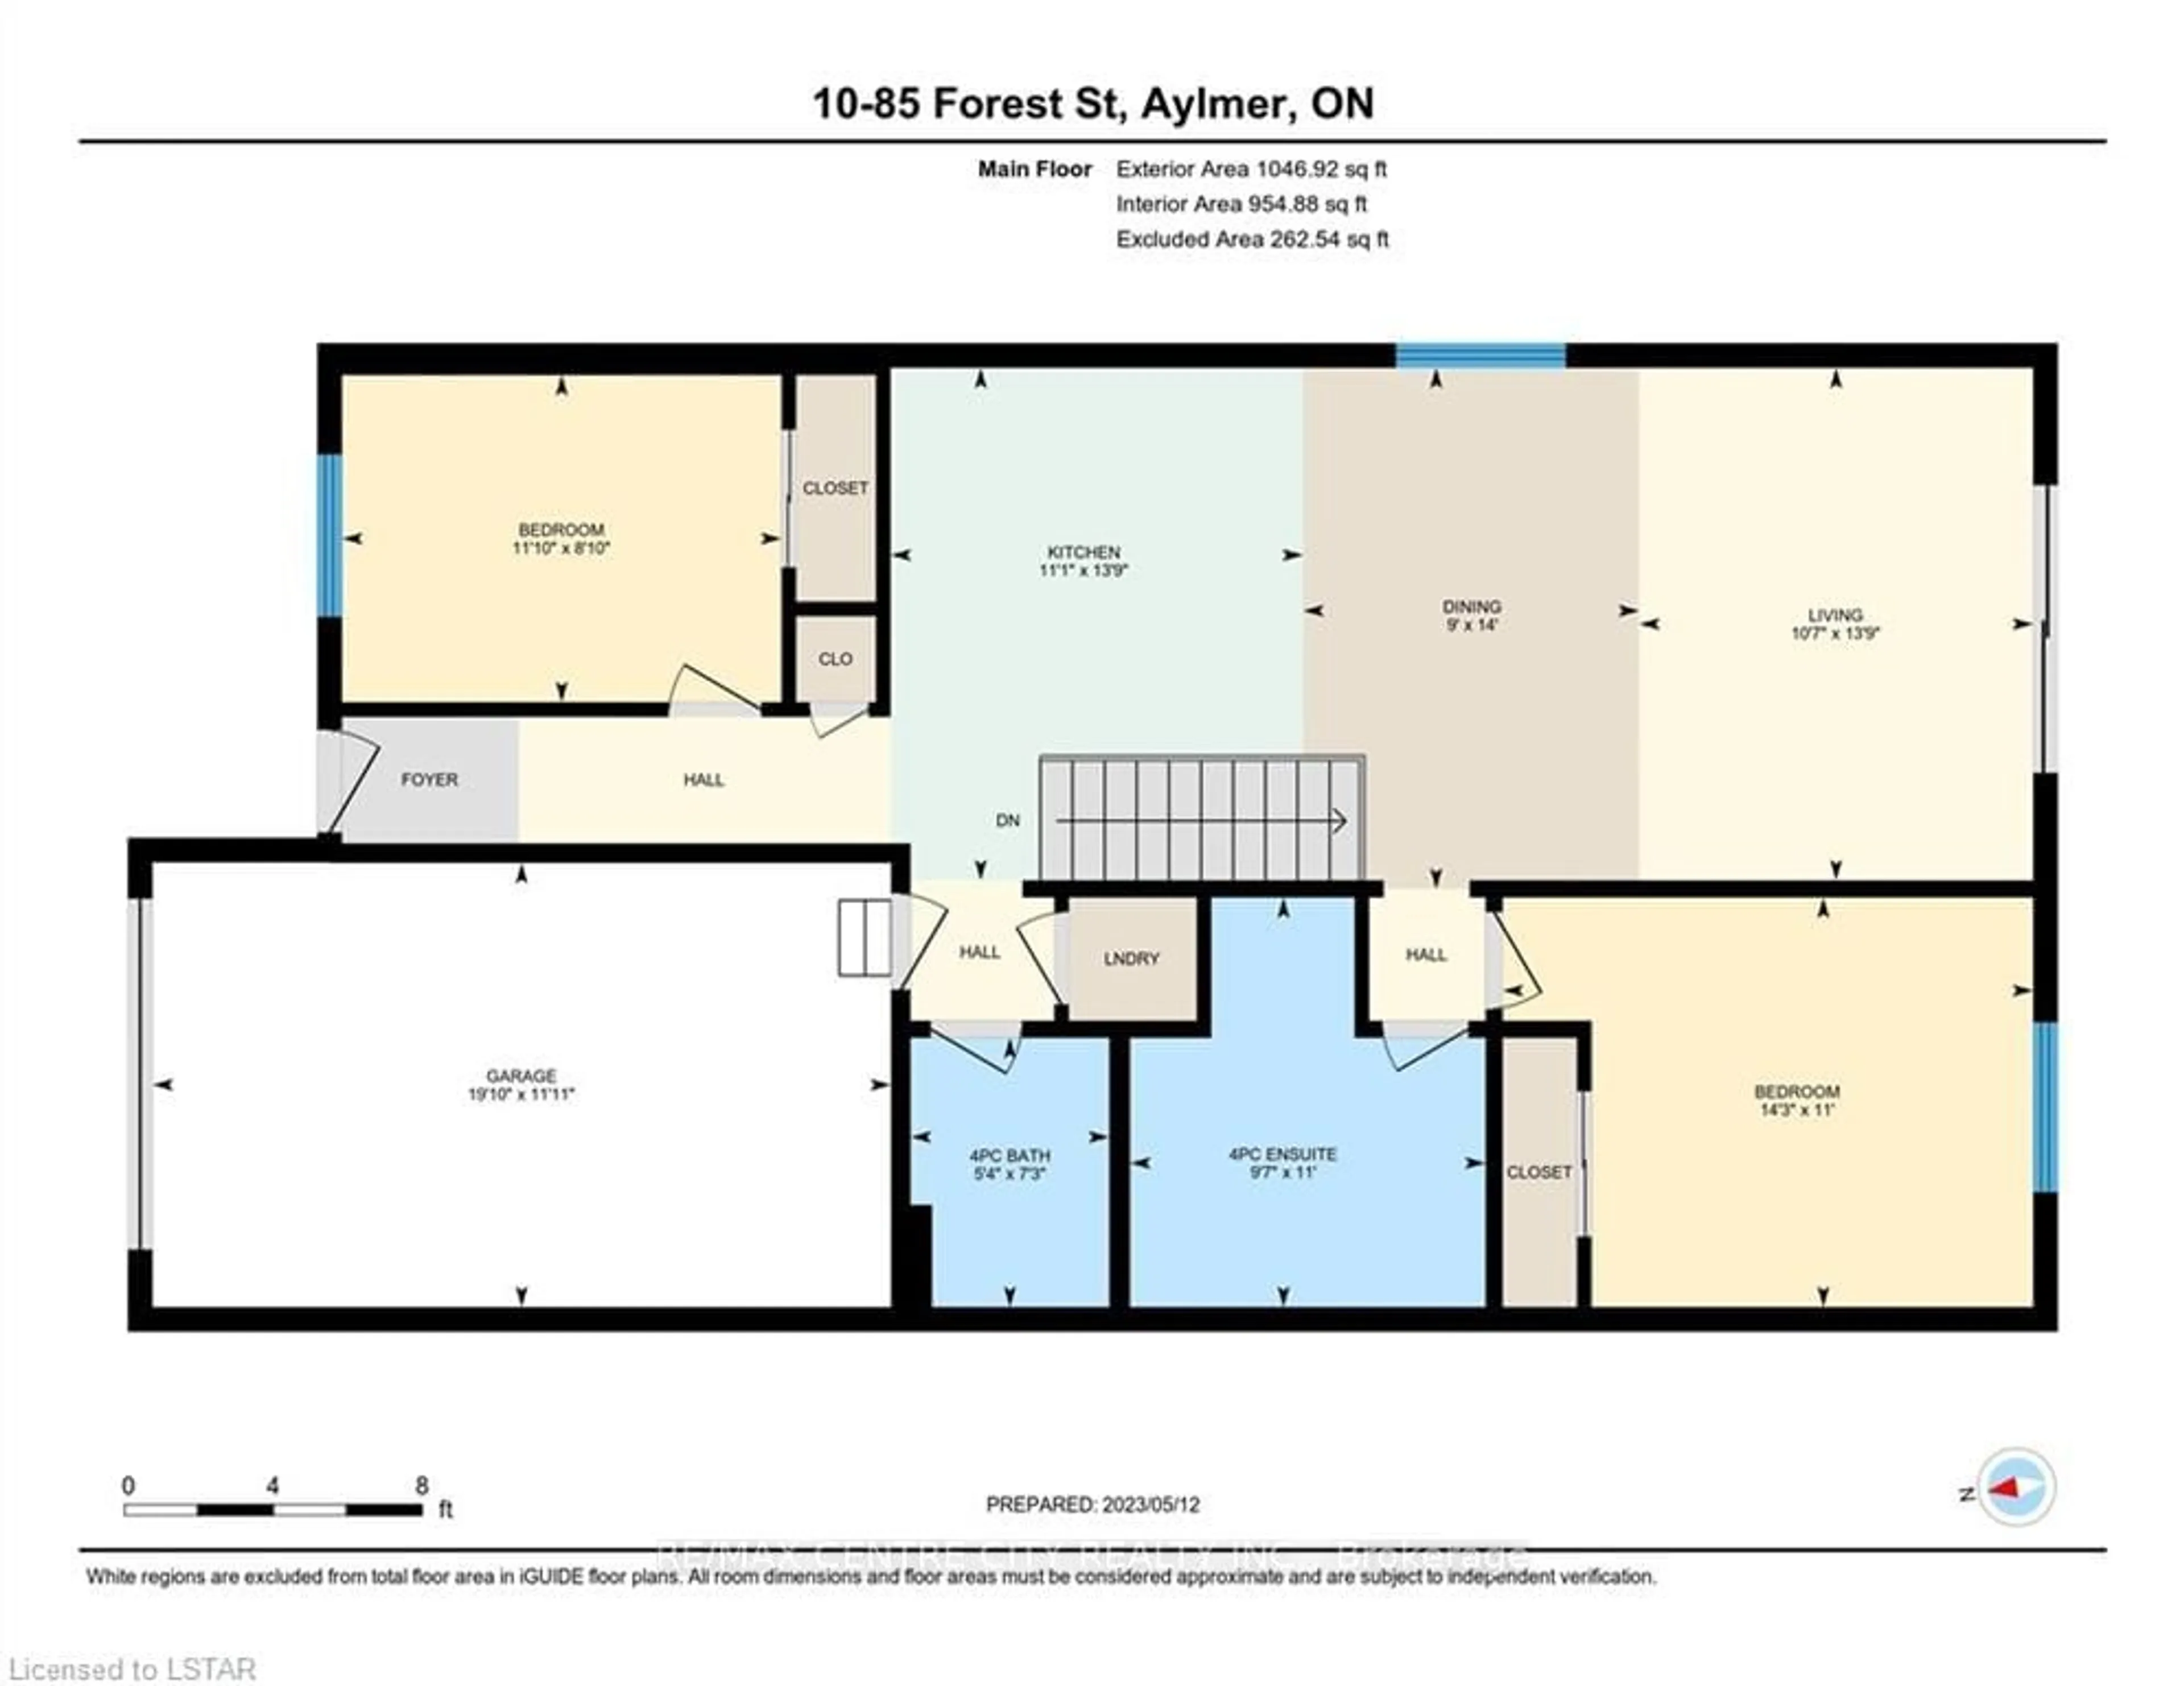 Floor plan for 85 Forest St #1, Aylmer Ontario N5H 1A5